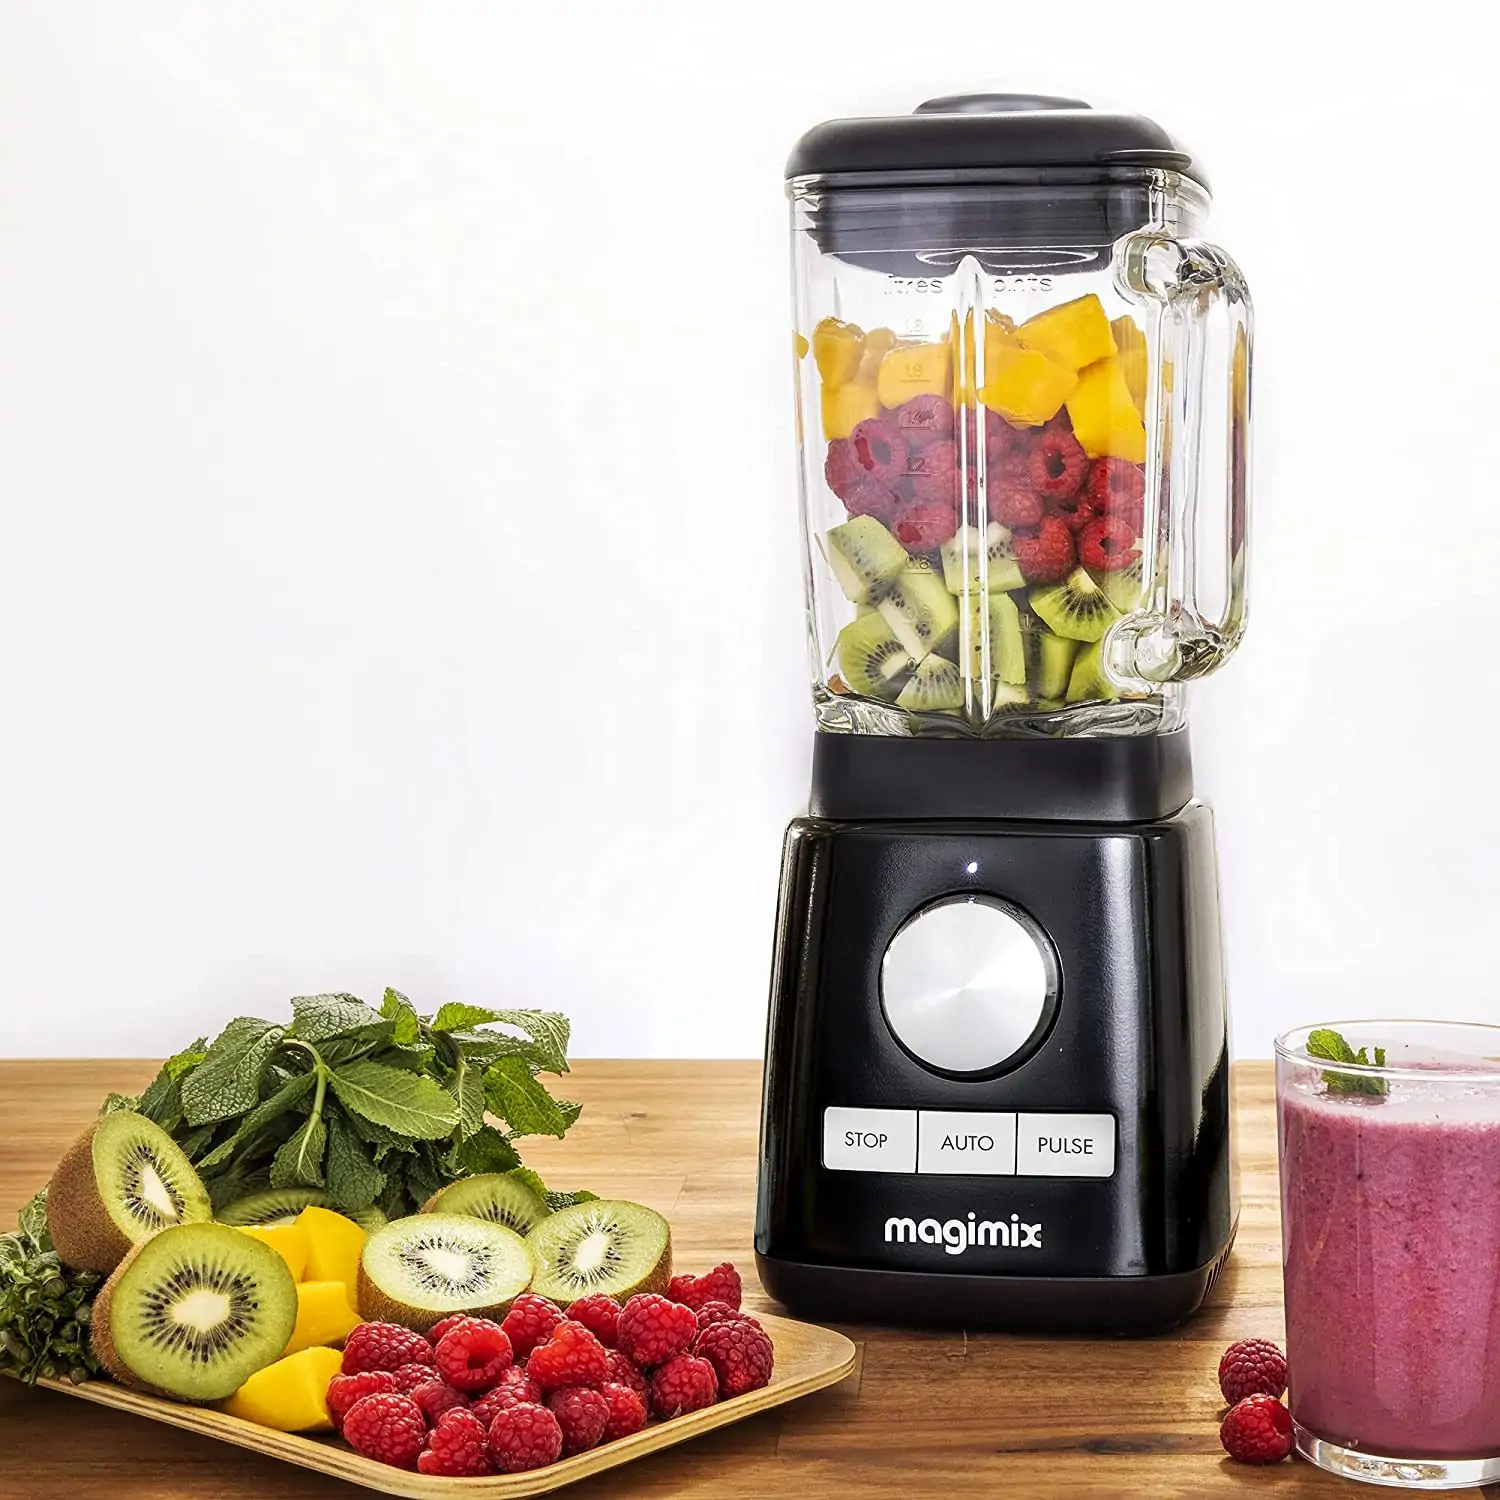 Magimix Blender Review: One The Best Heat Resistant